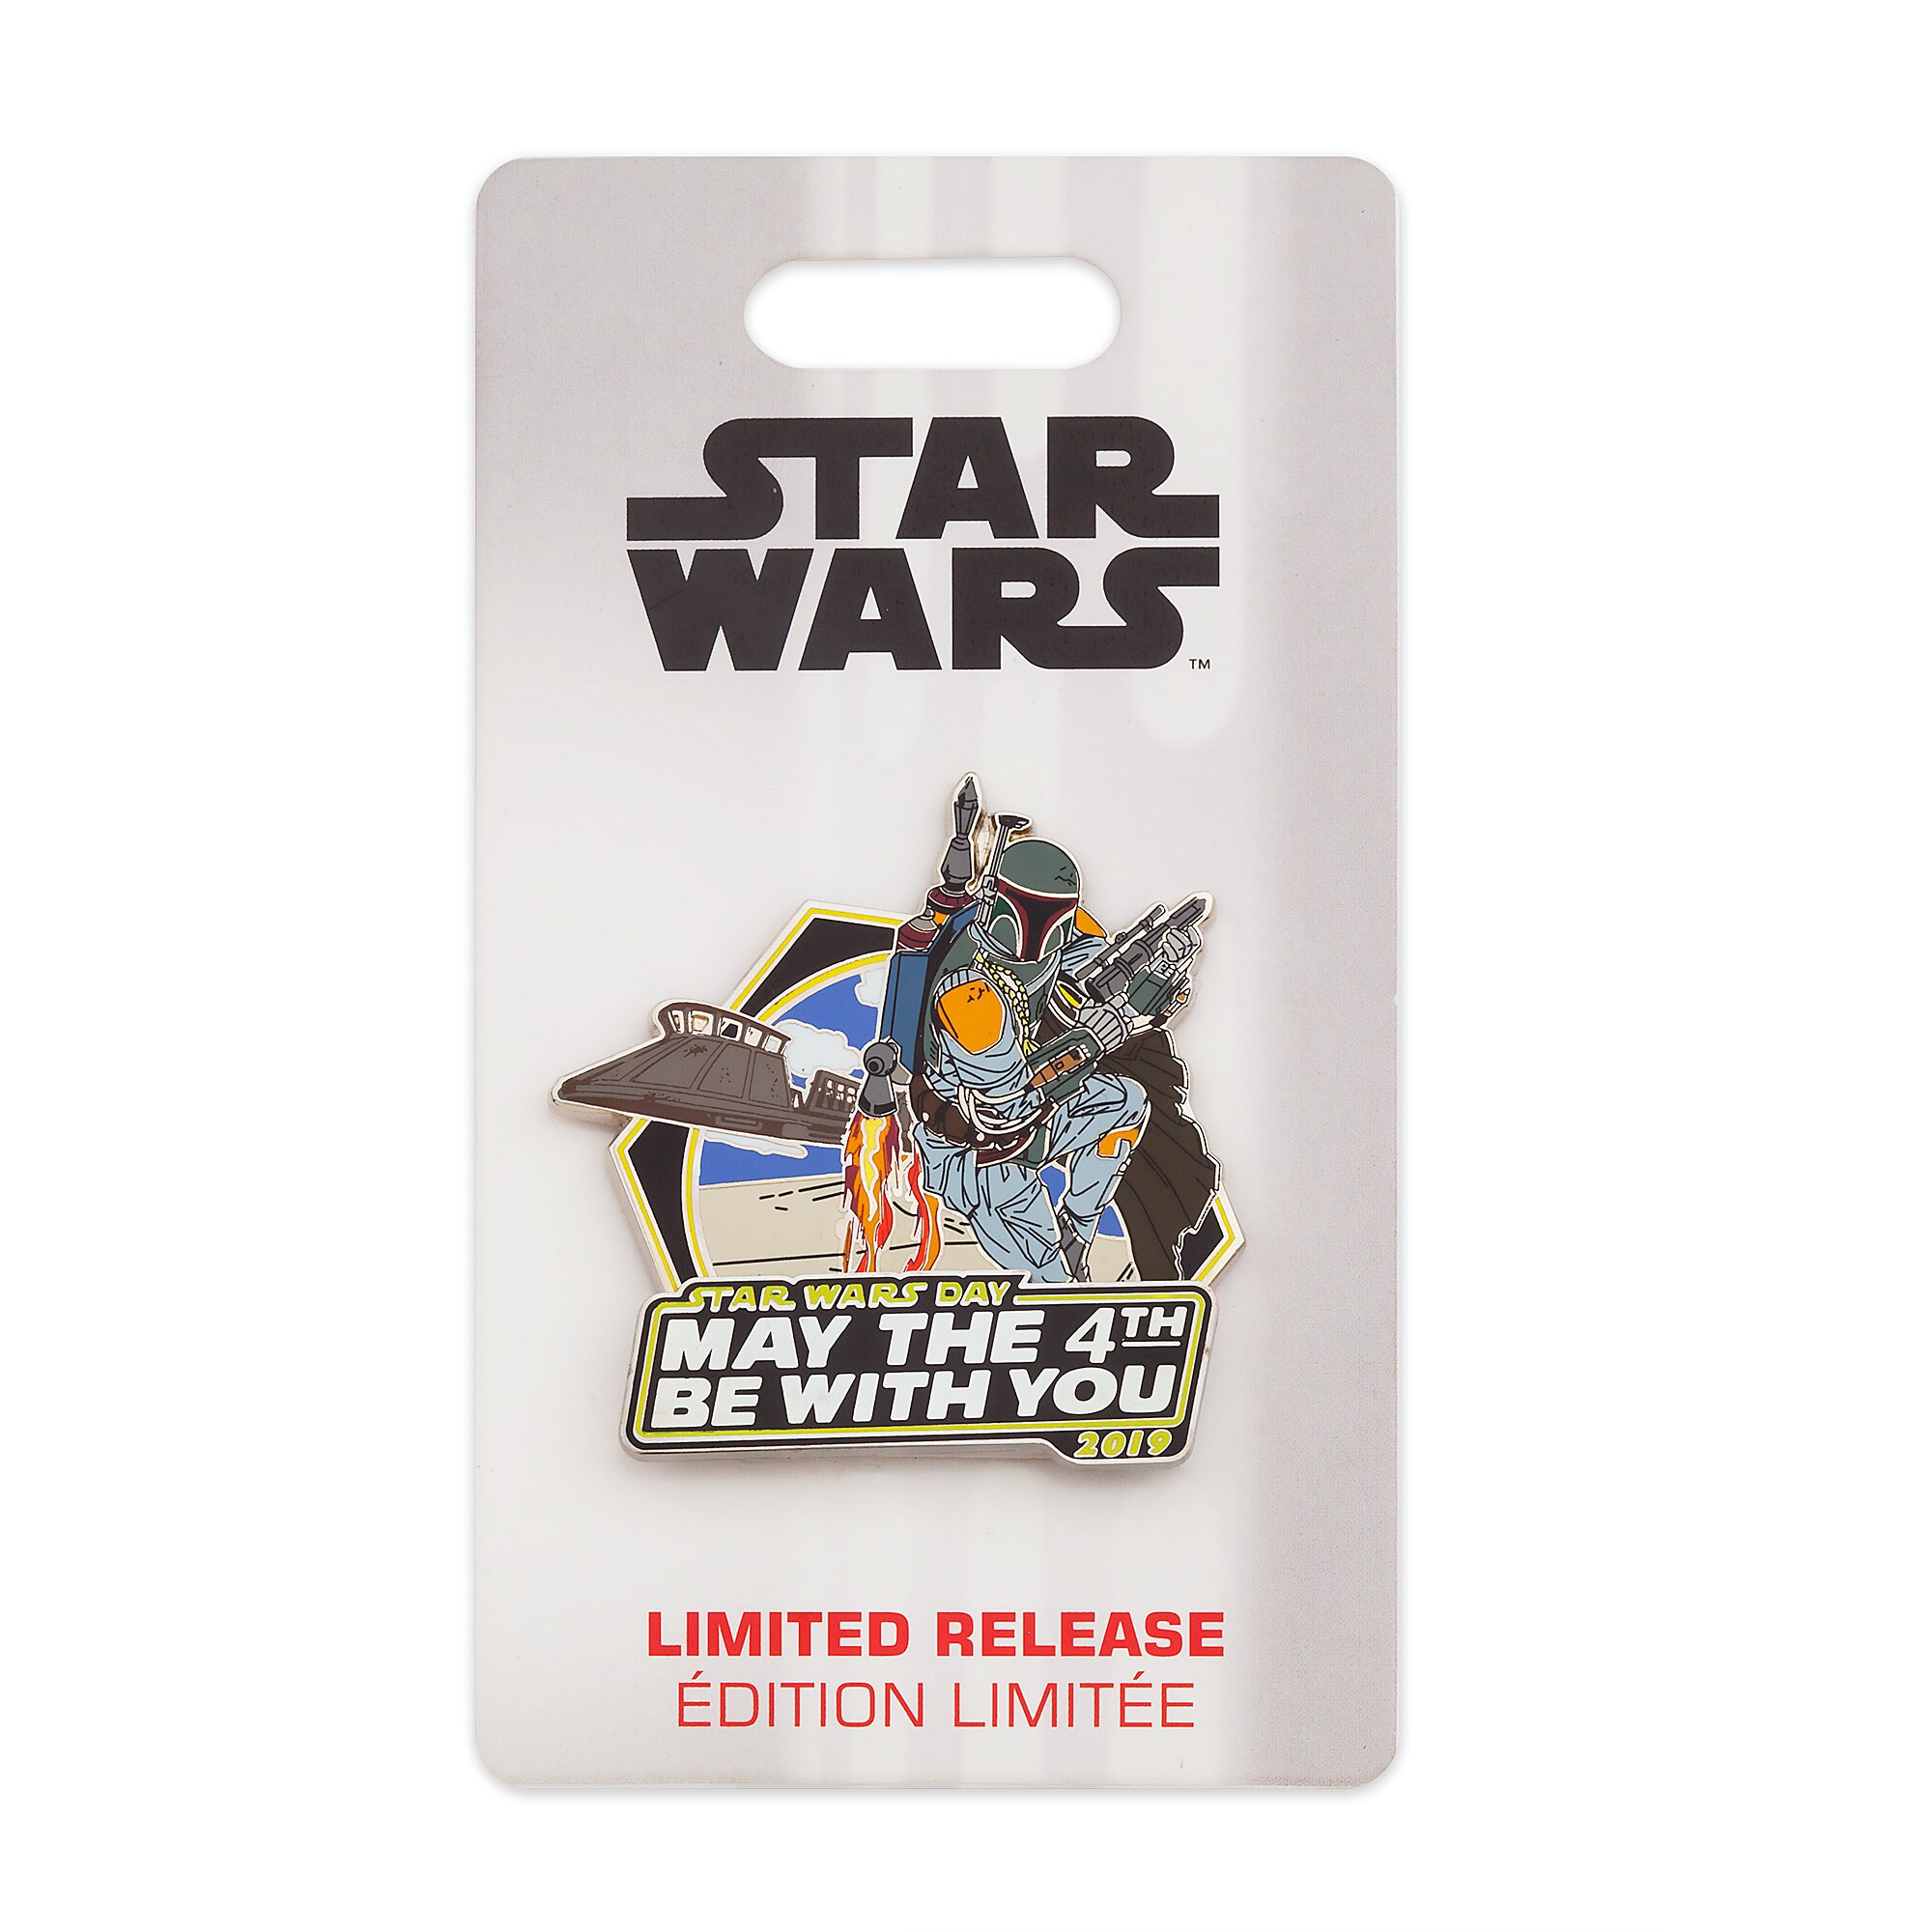 Star Wars Day ''May The 4th Be With You'' Pin - 2019 - Limited Release